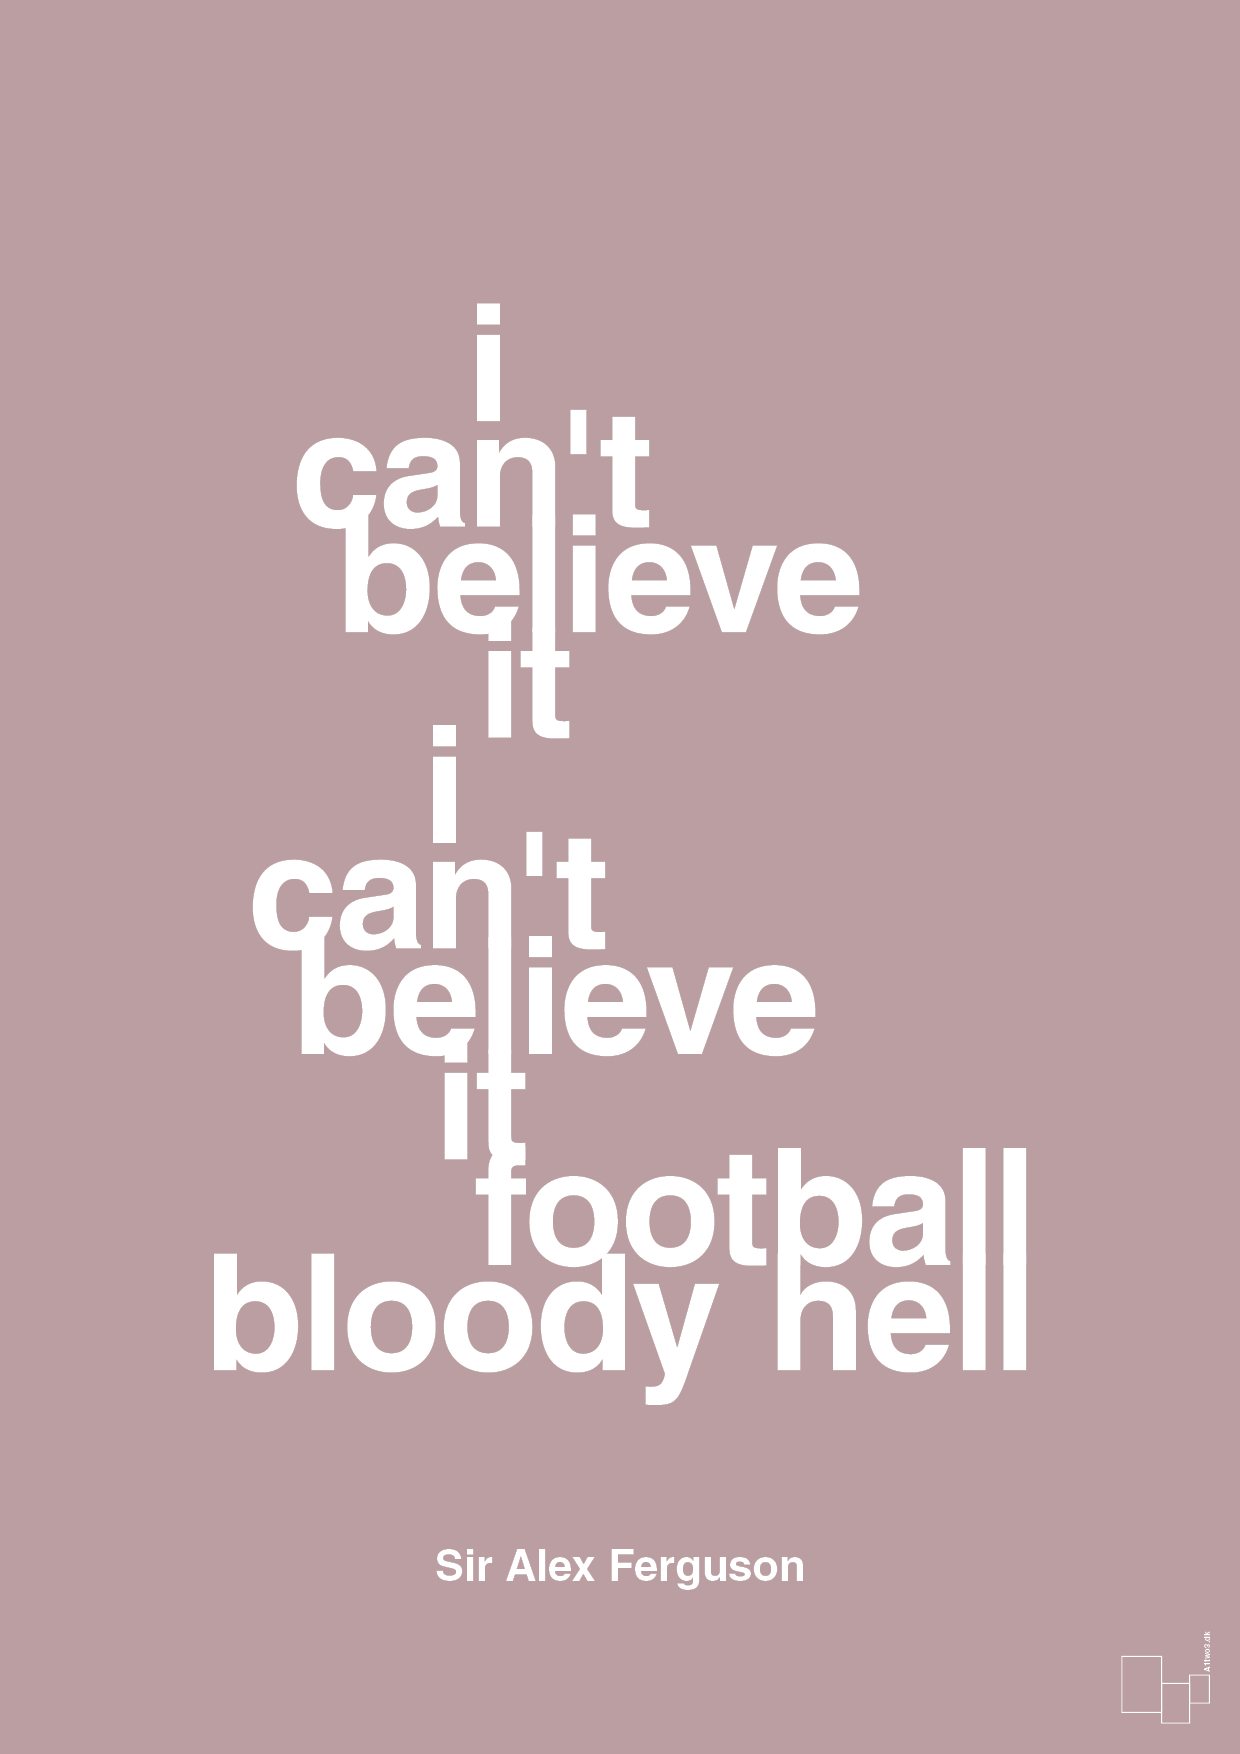 i can't believe it i can't believe it football bloody hell - Plakat med Citater i Light Rose